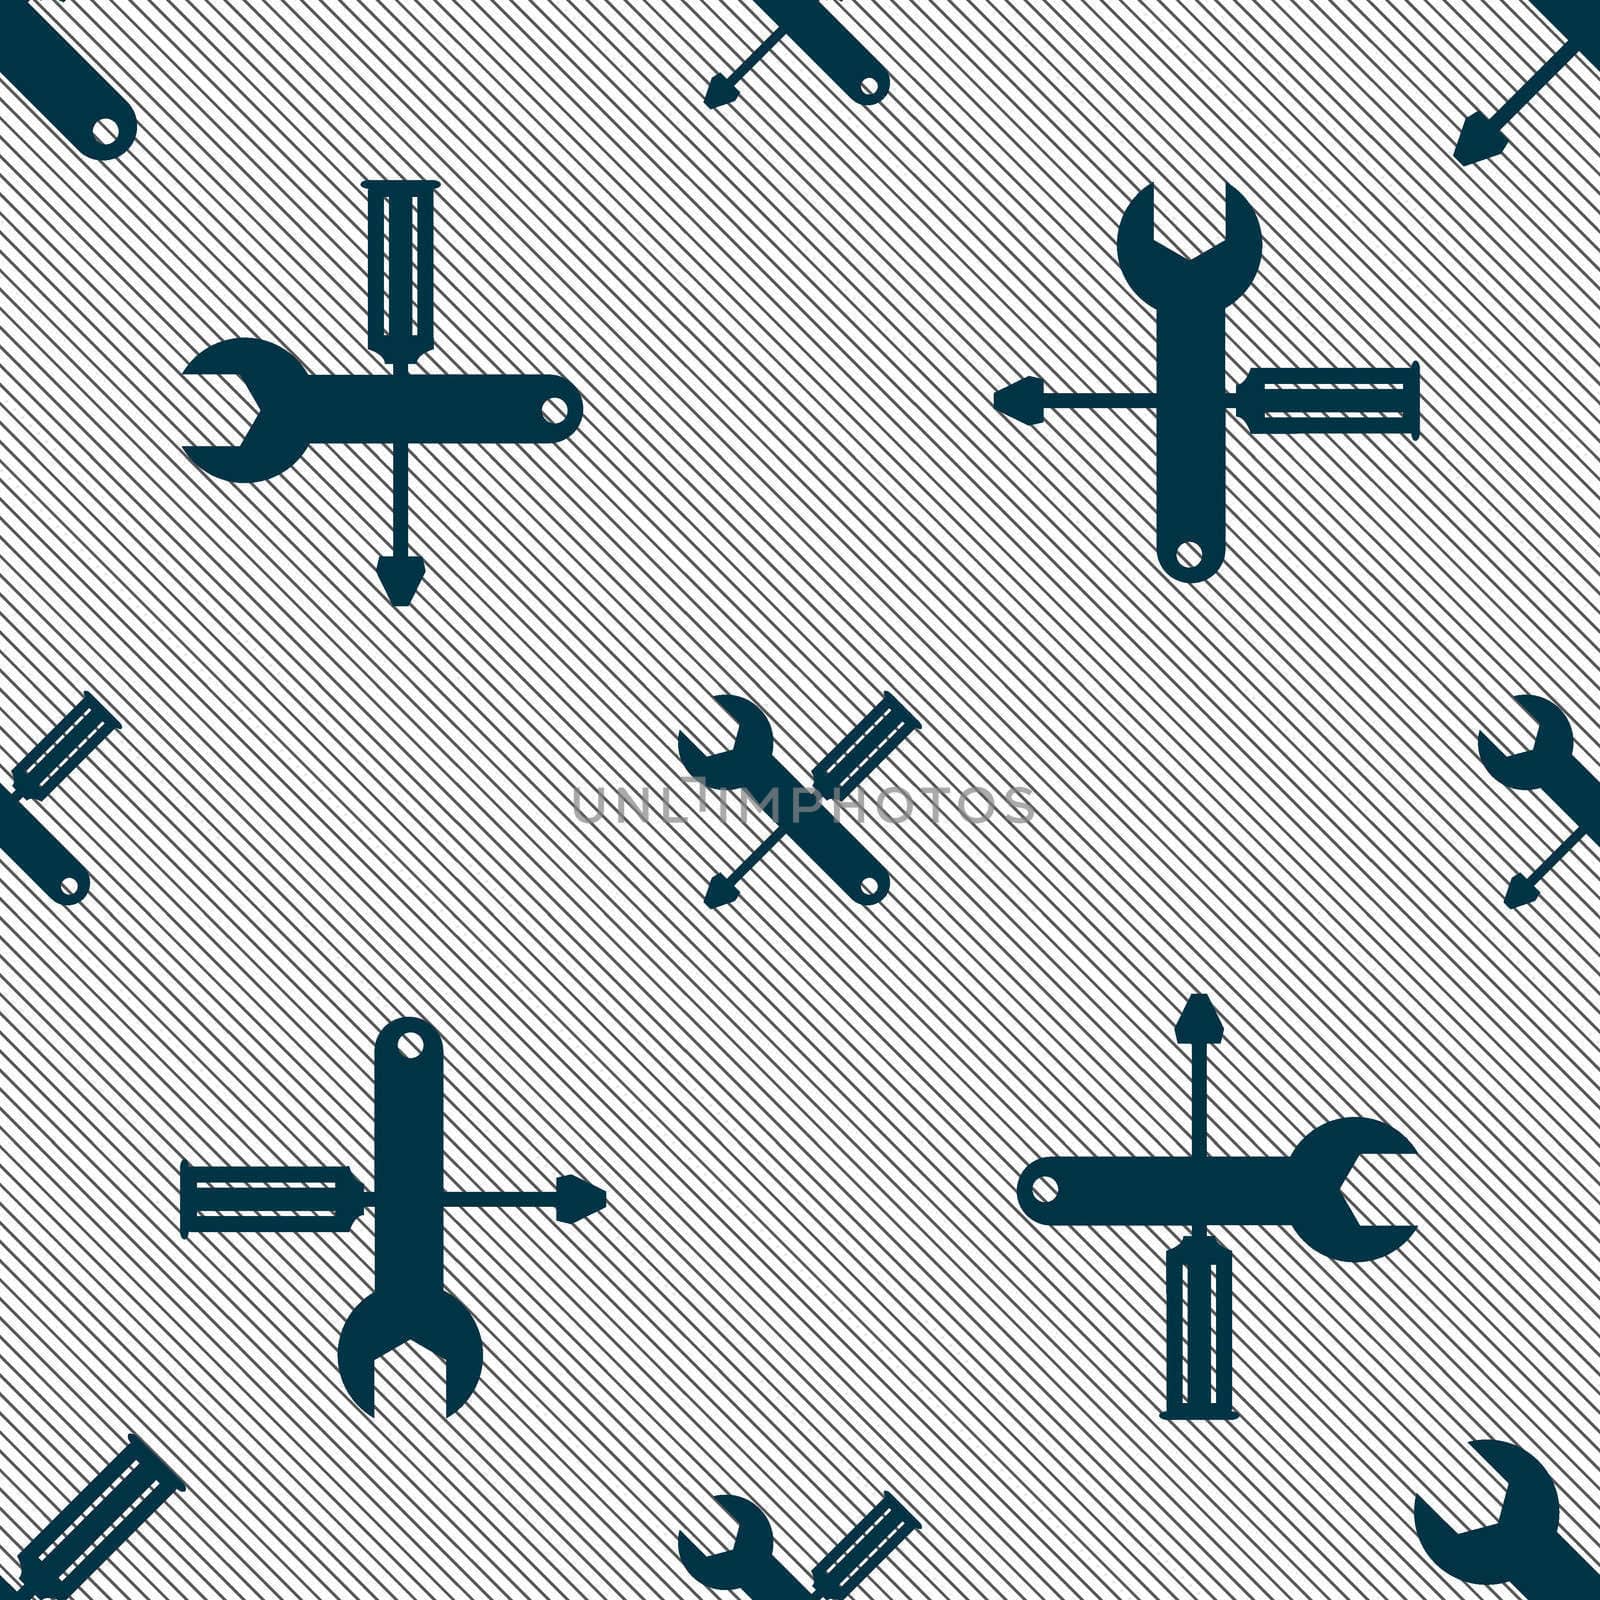 Repair tool sign icon. Service symbol. screwdriver with wrench. Seamless pattern with geometric texture. illustration